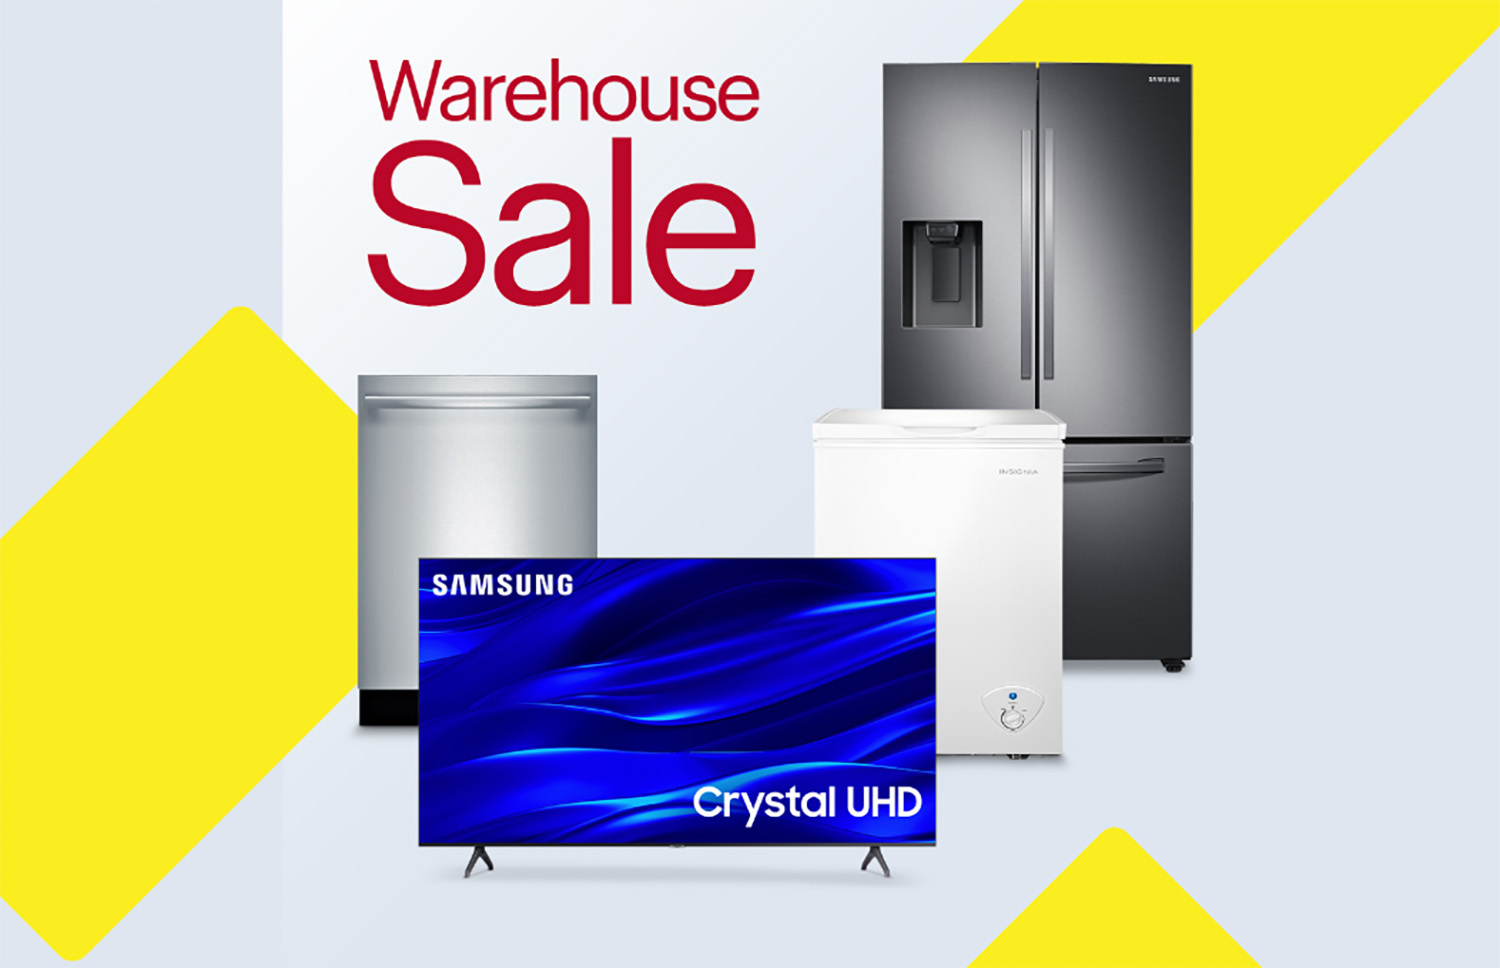 Best Buy Warehouse Sale [Appliances, TVs, Apr 5-18, Brampton, ON and Langley, BC]